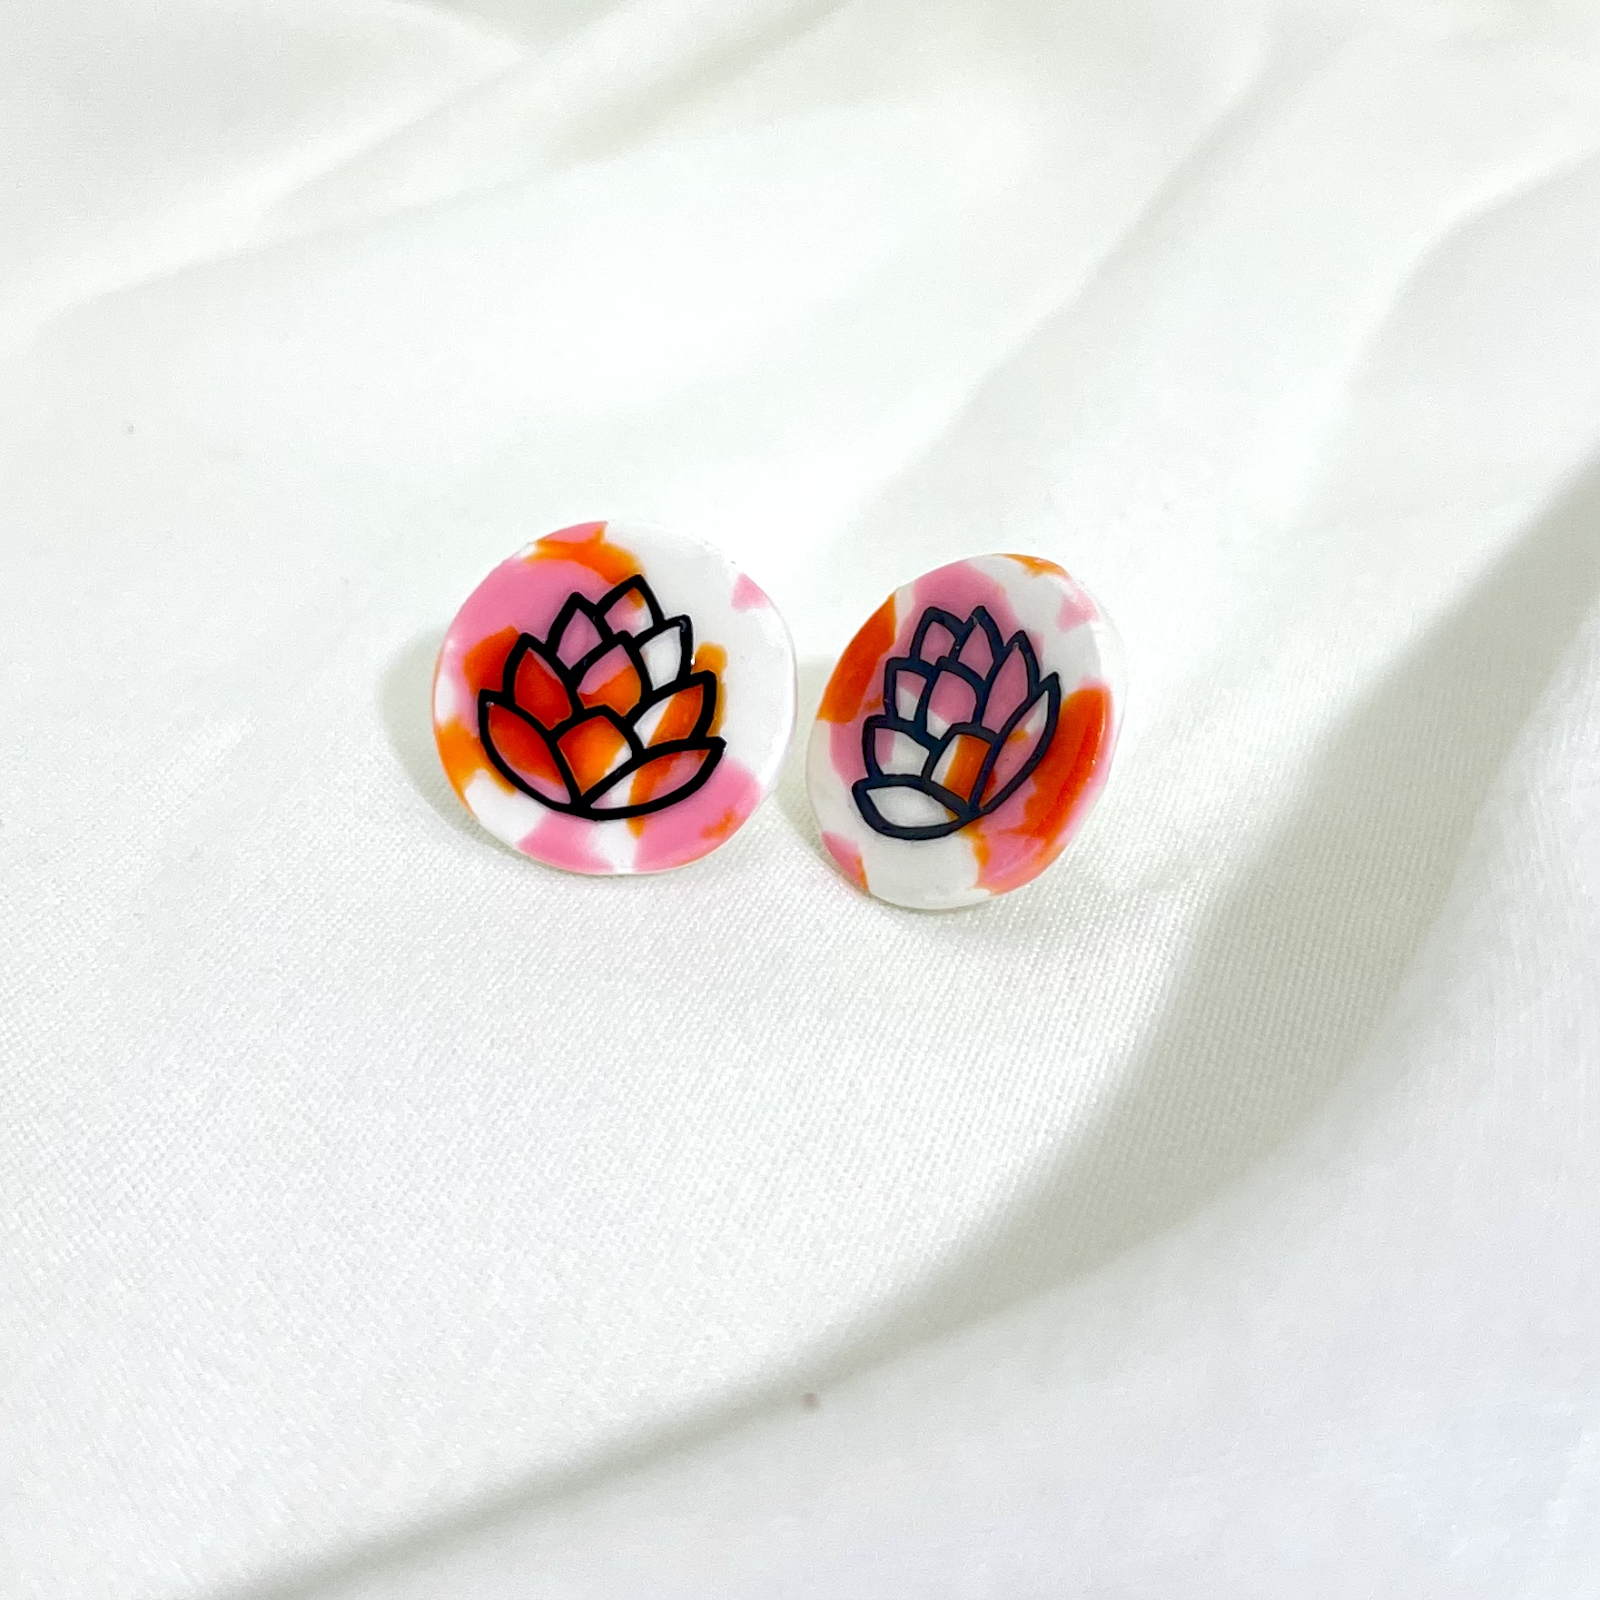 A pair of round earrings featuring a dark outline of a hop cone, on a marbled background of orange, pink and white. 